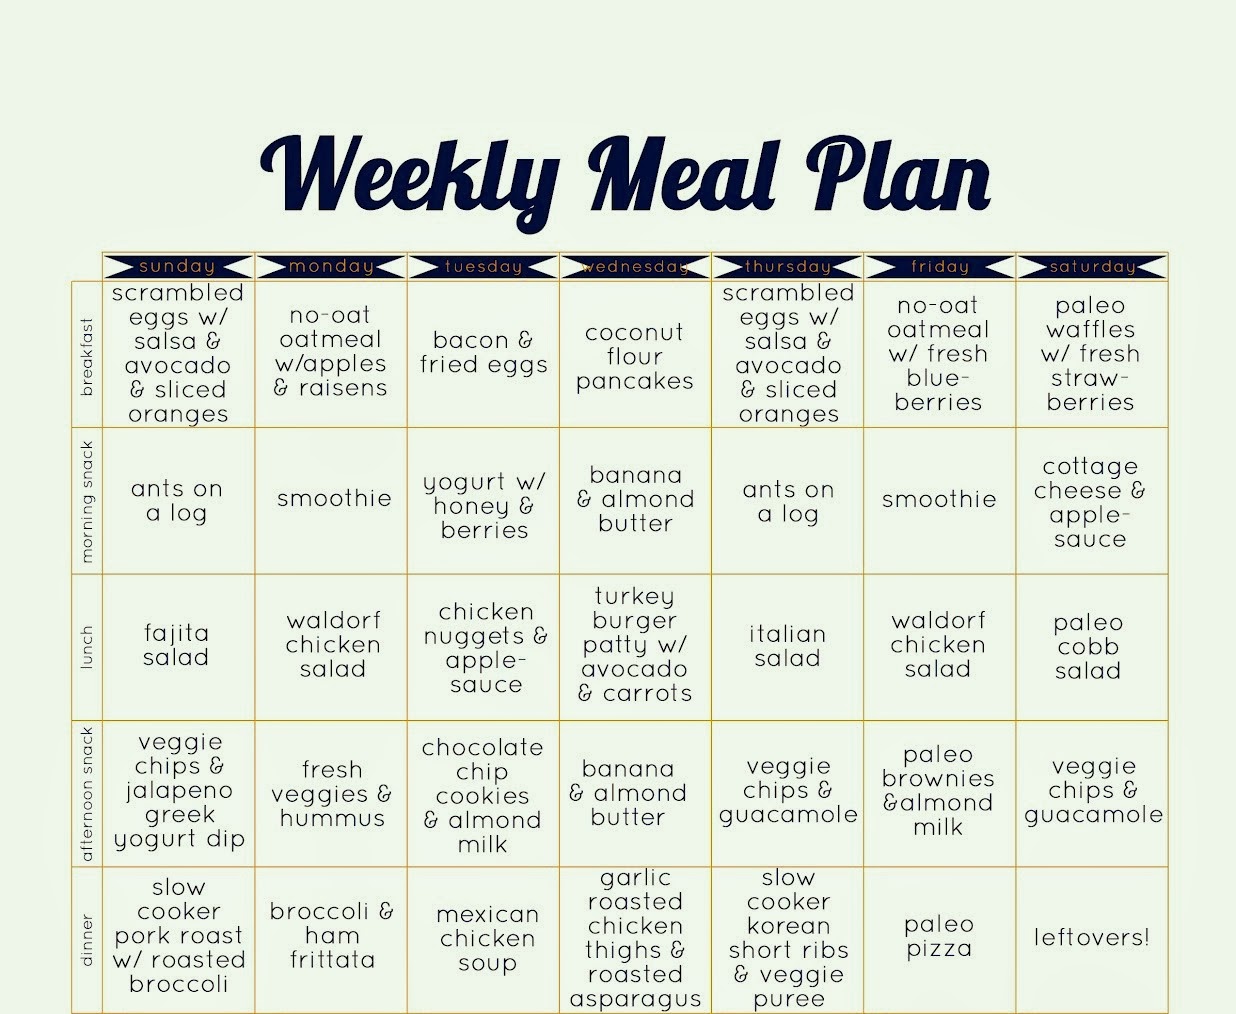 Looking for an ideal paleo diet meal plan? ~ The Paleo Diet Blog